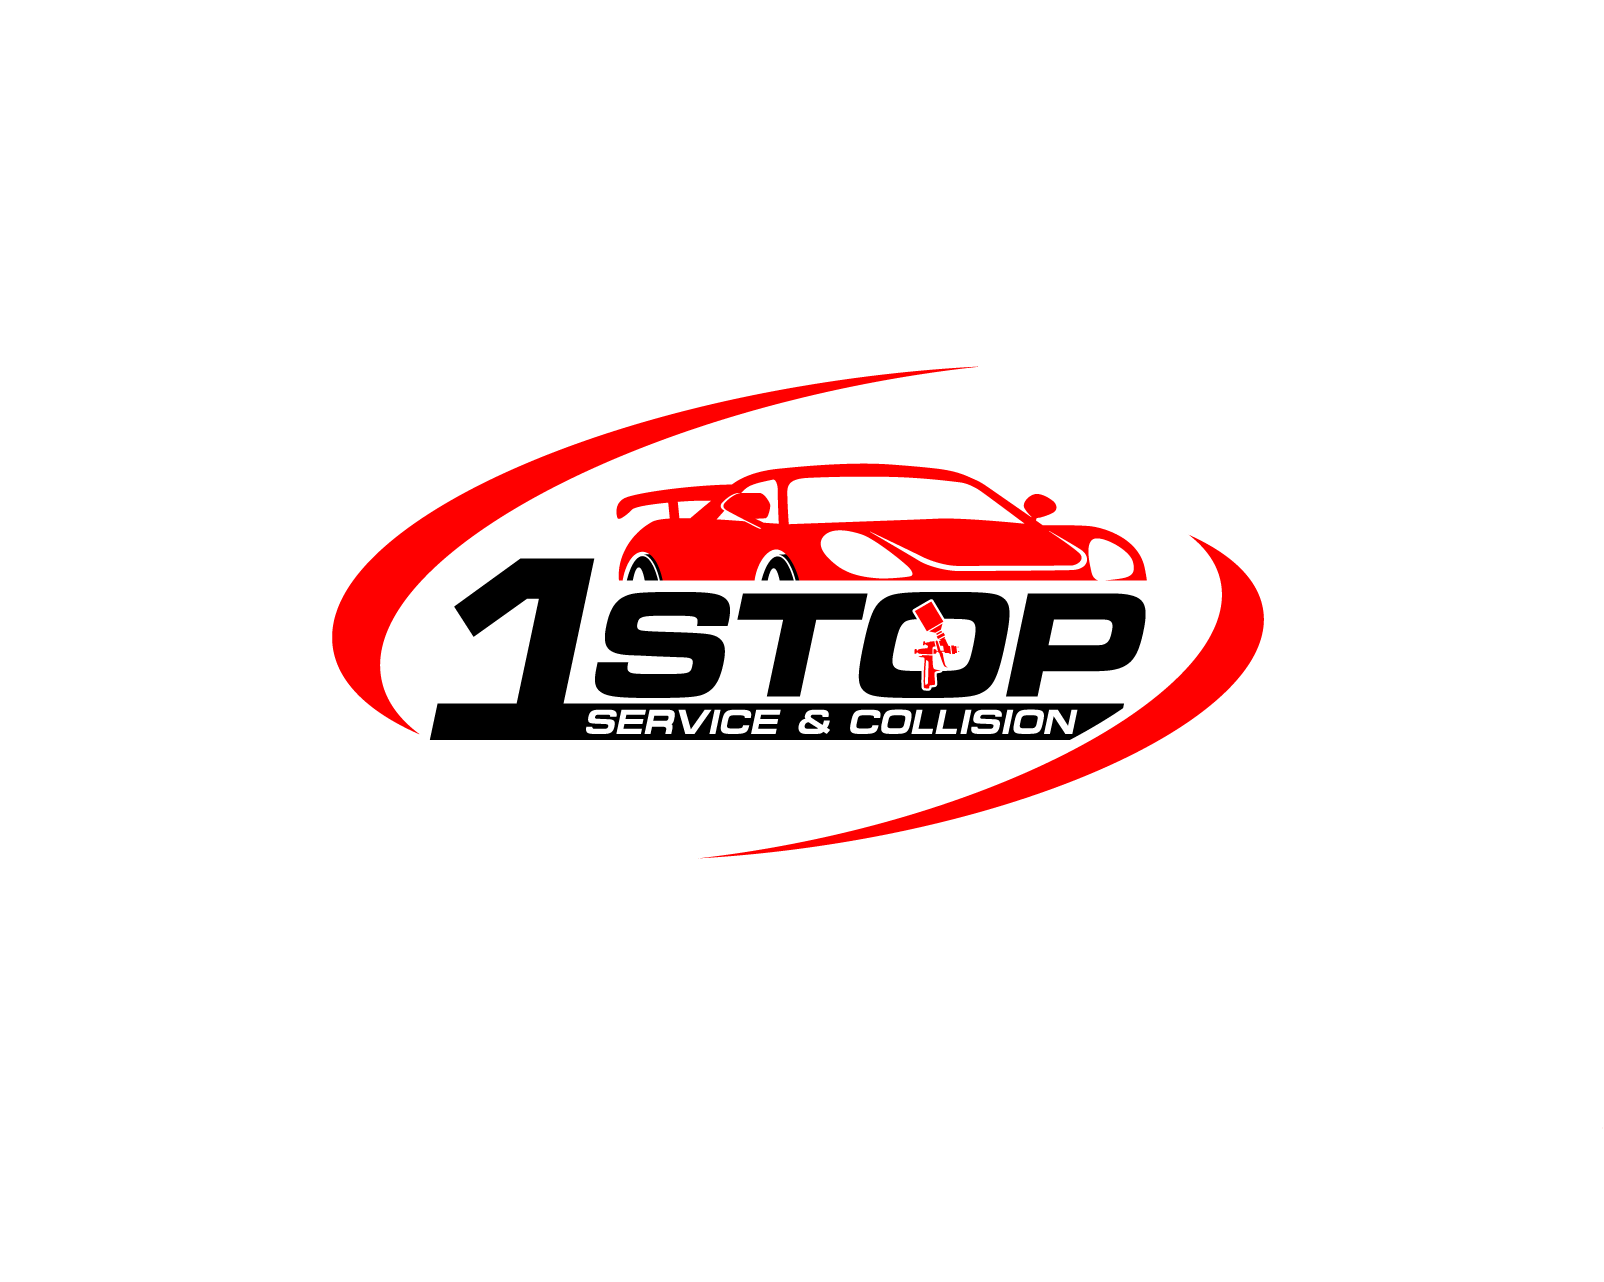 Logo Design Contest for 1STOP SERVICE AND COLLISION | Hatchwise